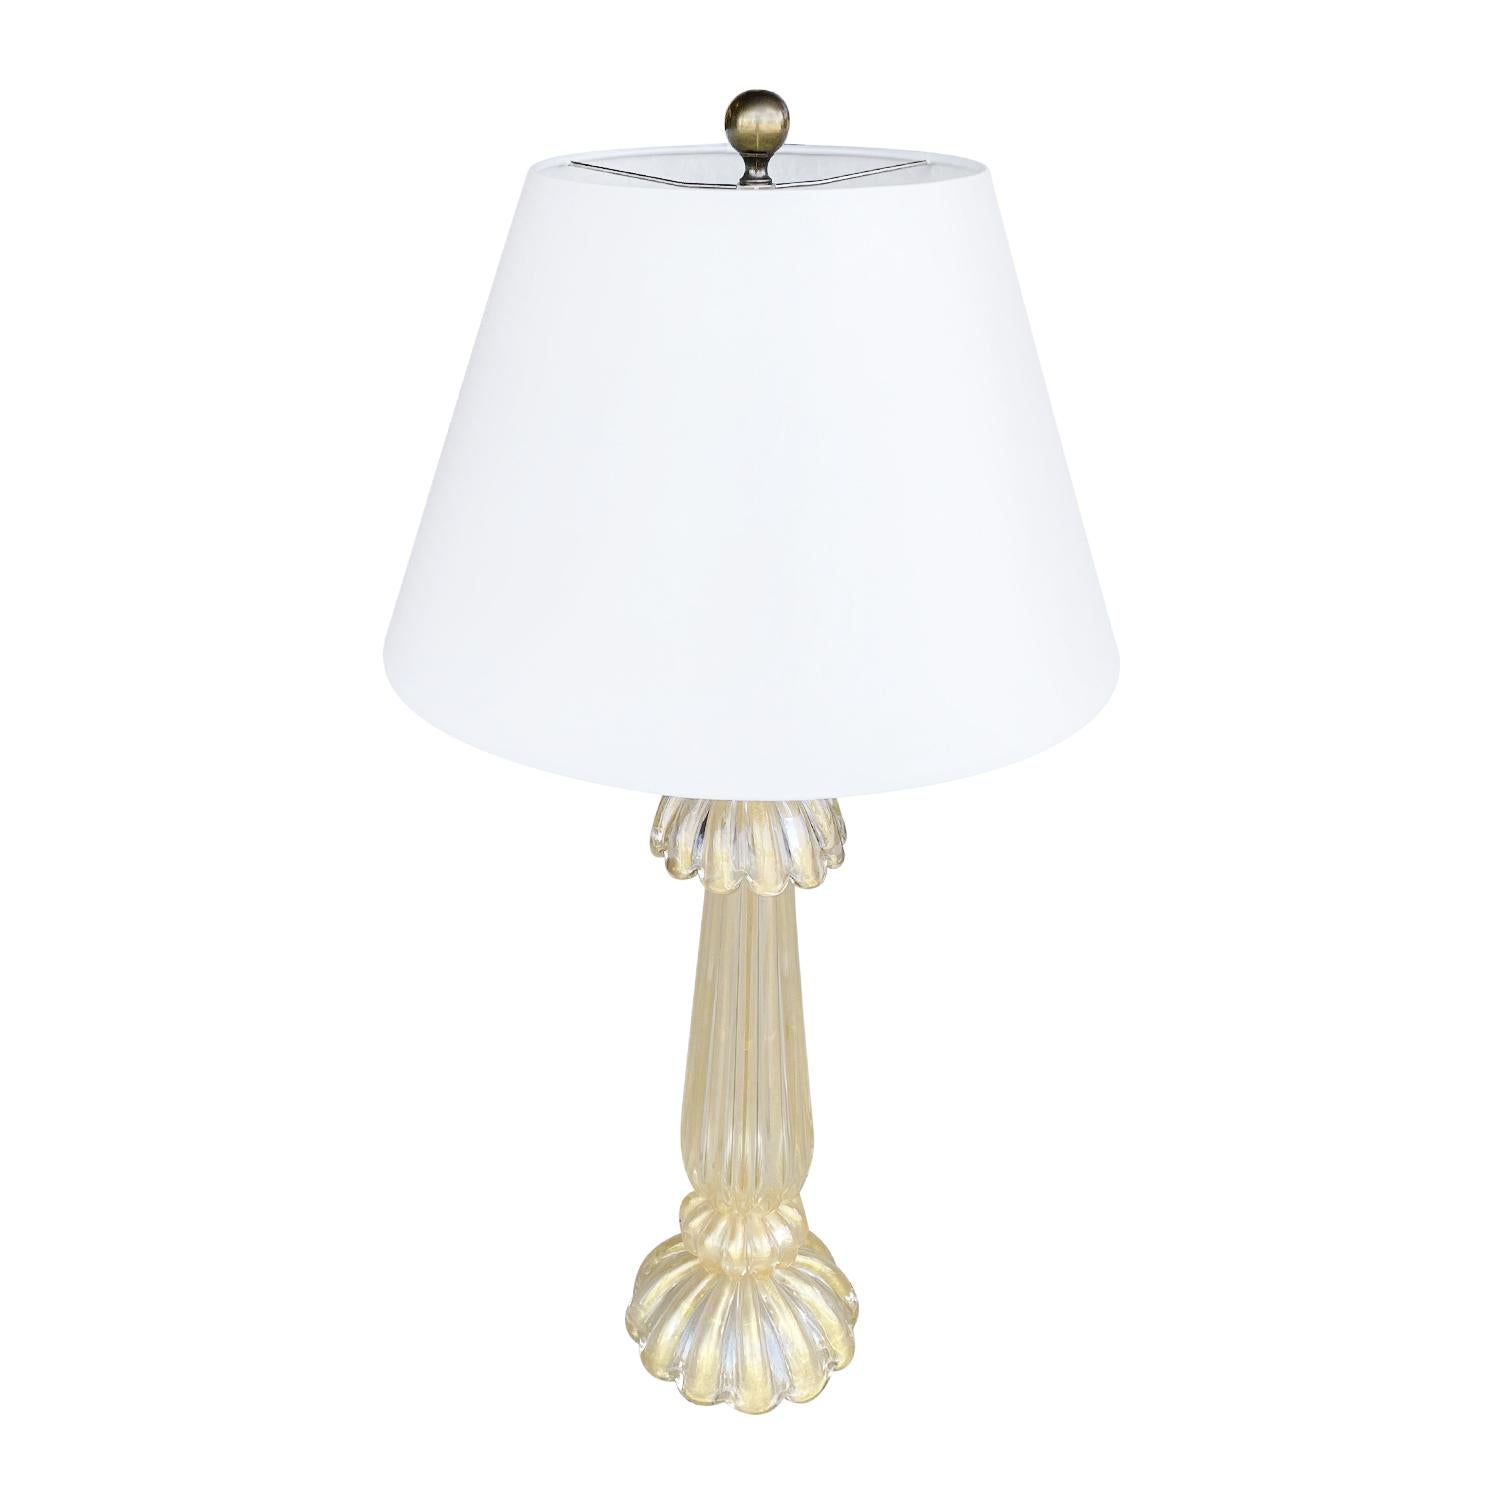 vintage frosted glass table lamp